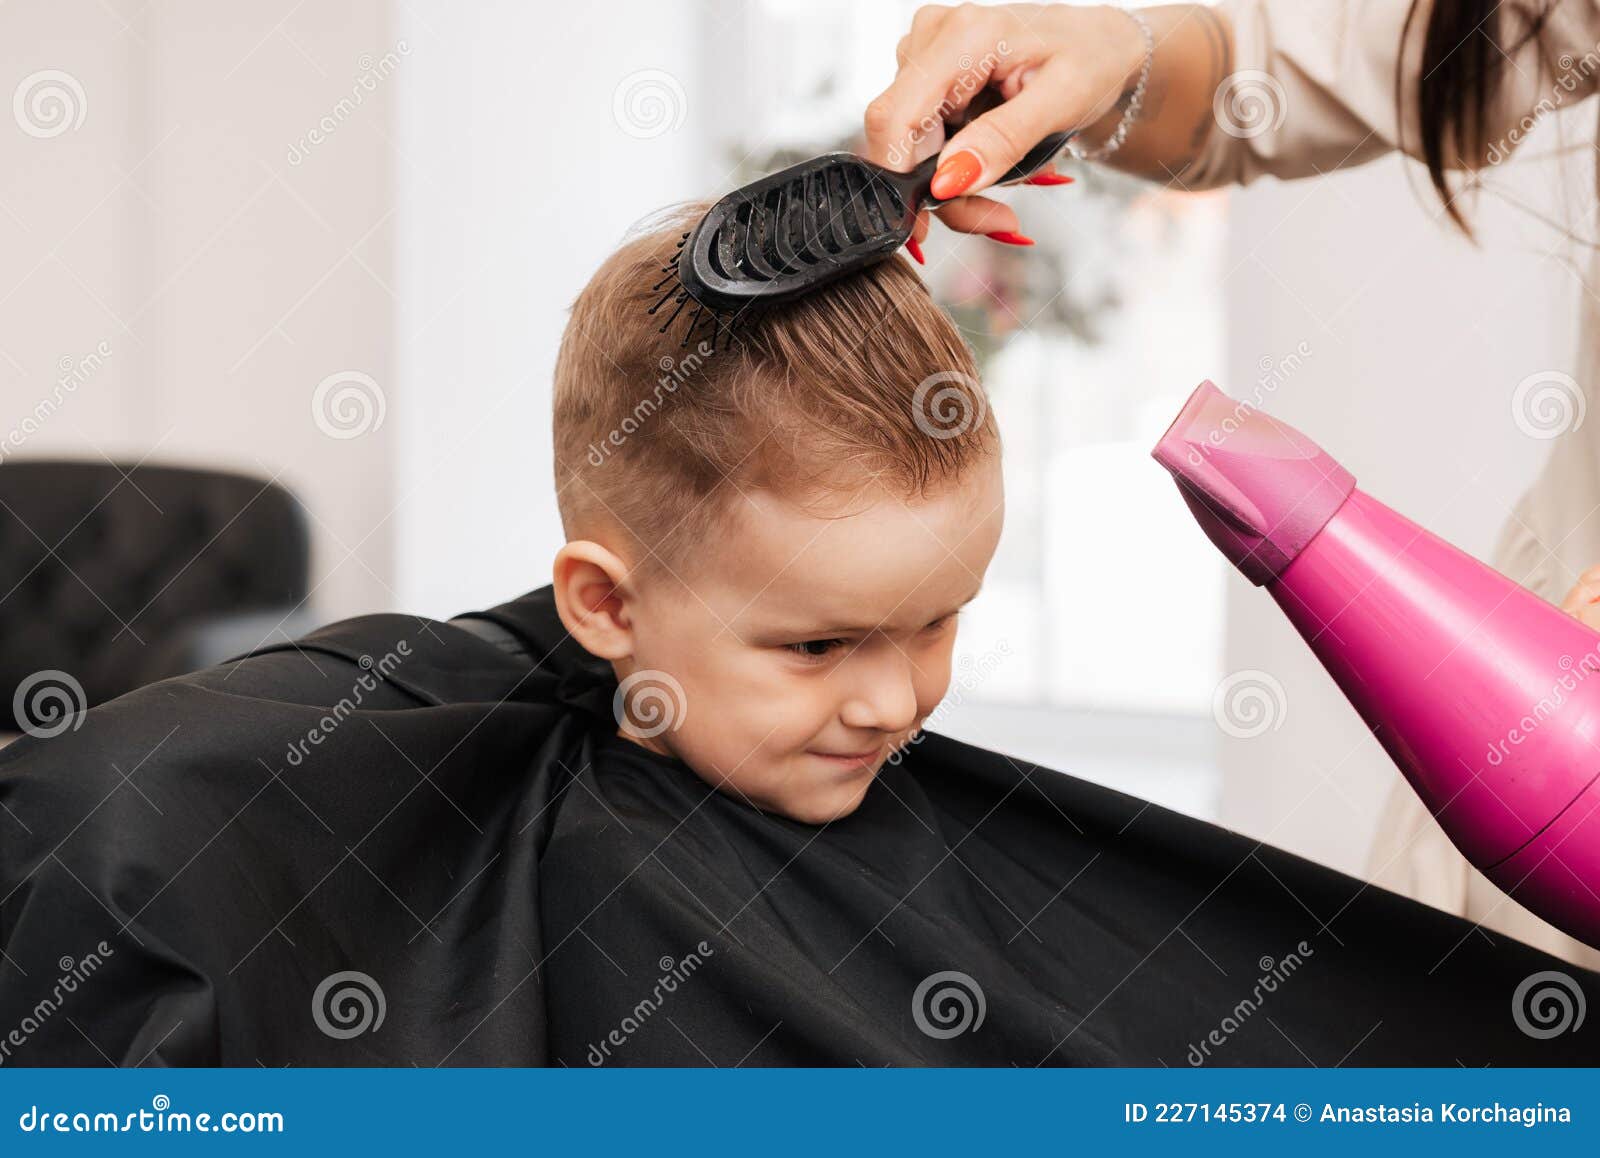 Shooting in a Beauty Salon. the Hairdresser Does the Styling of the Little  Boy with a Hair Dryer and a Comb. Stock Photo - Image of head, salon:  227145374